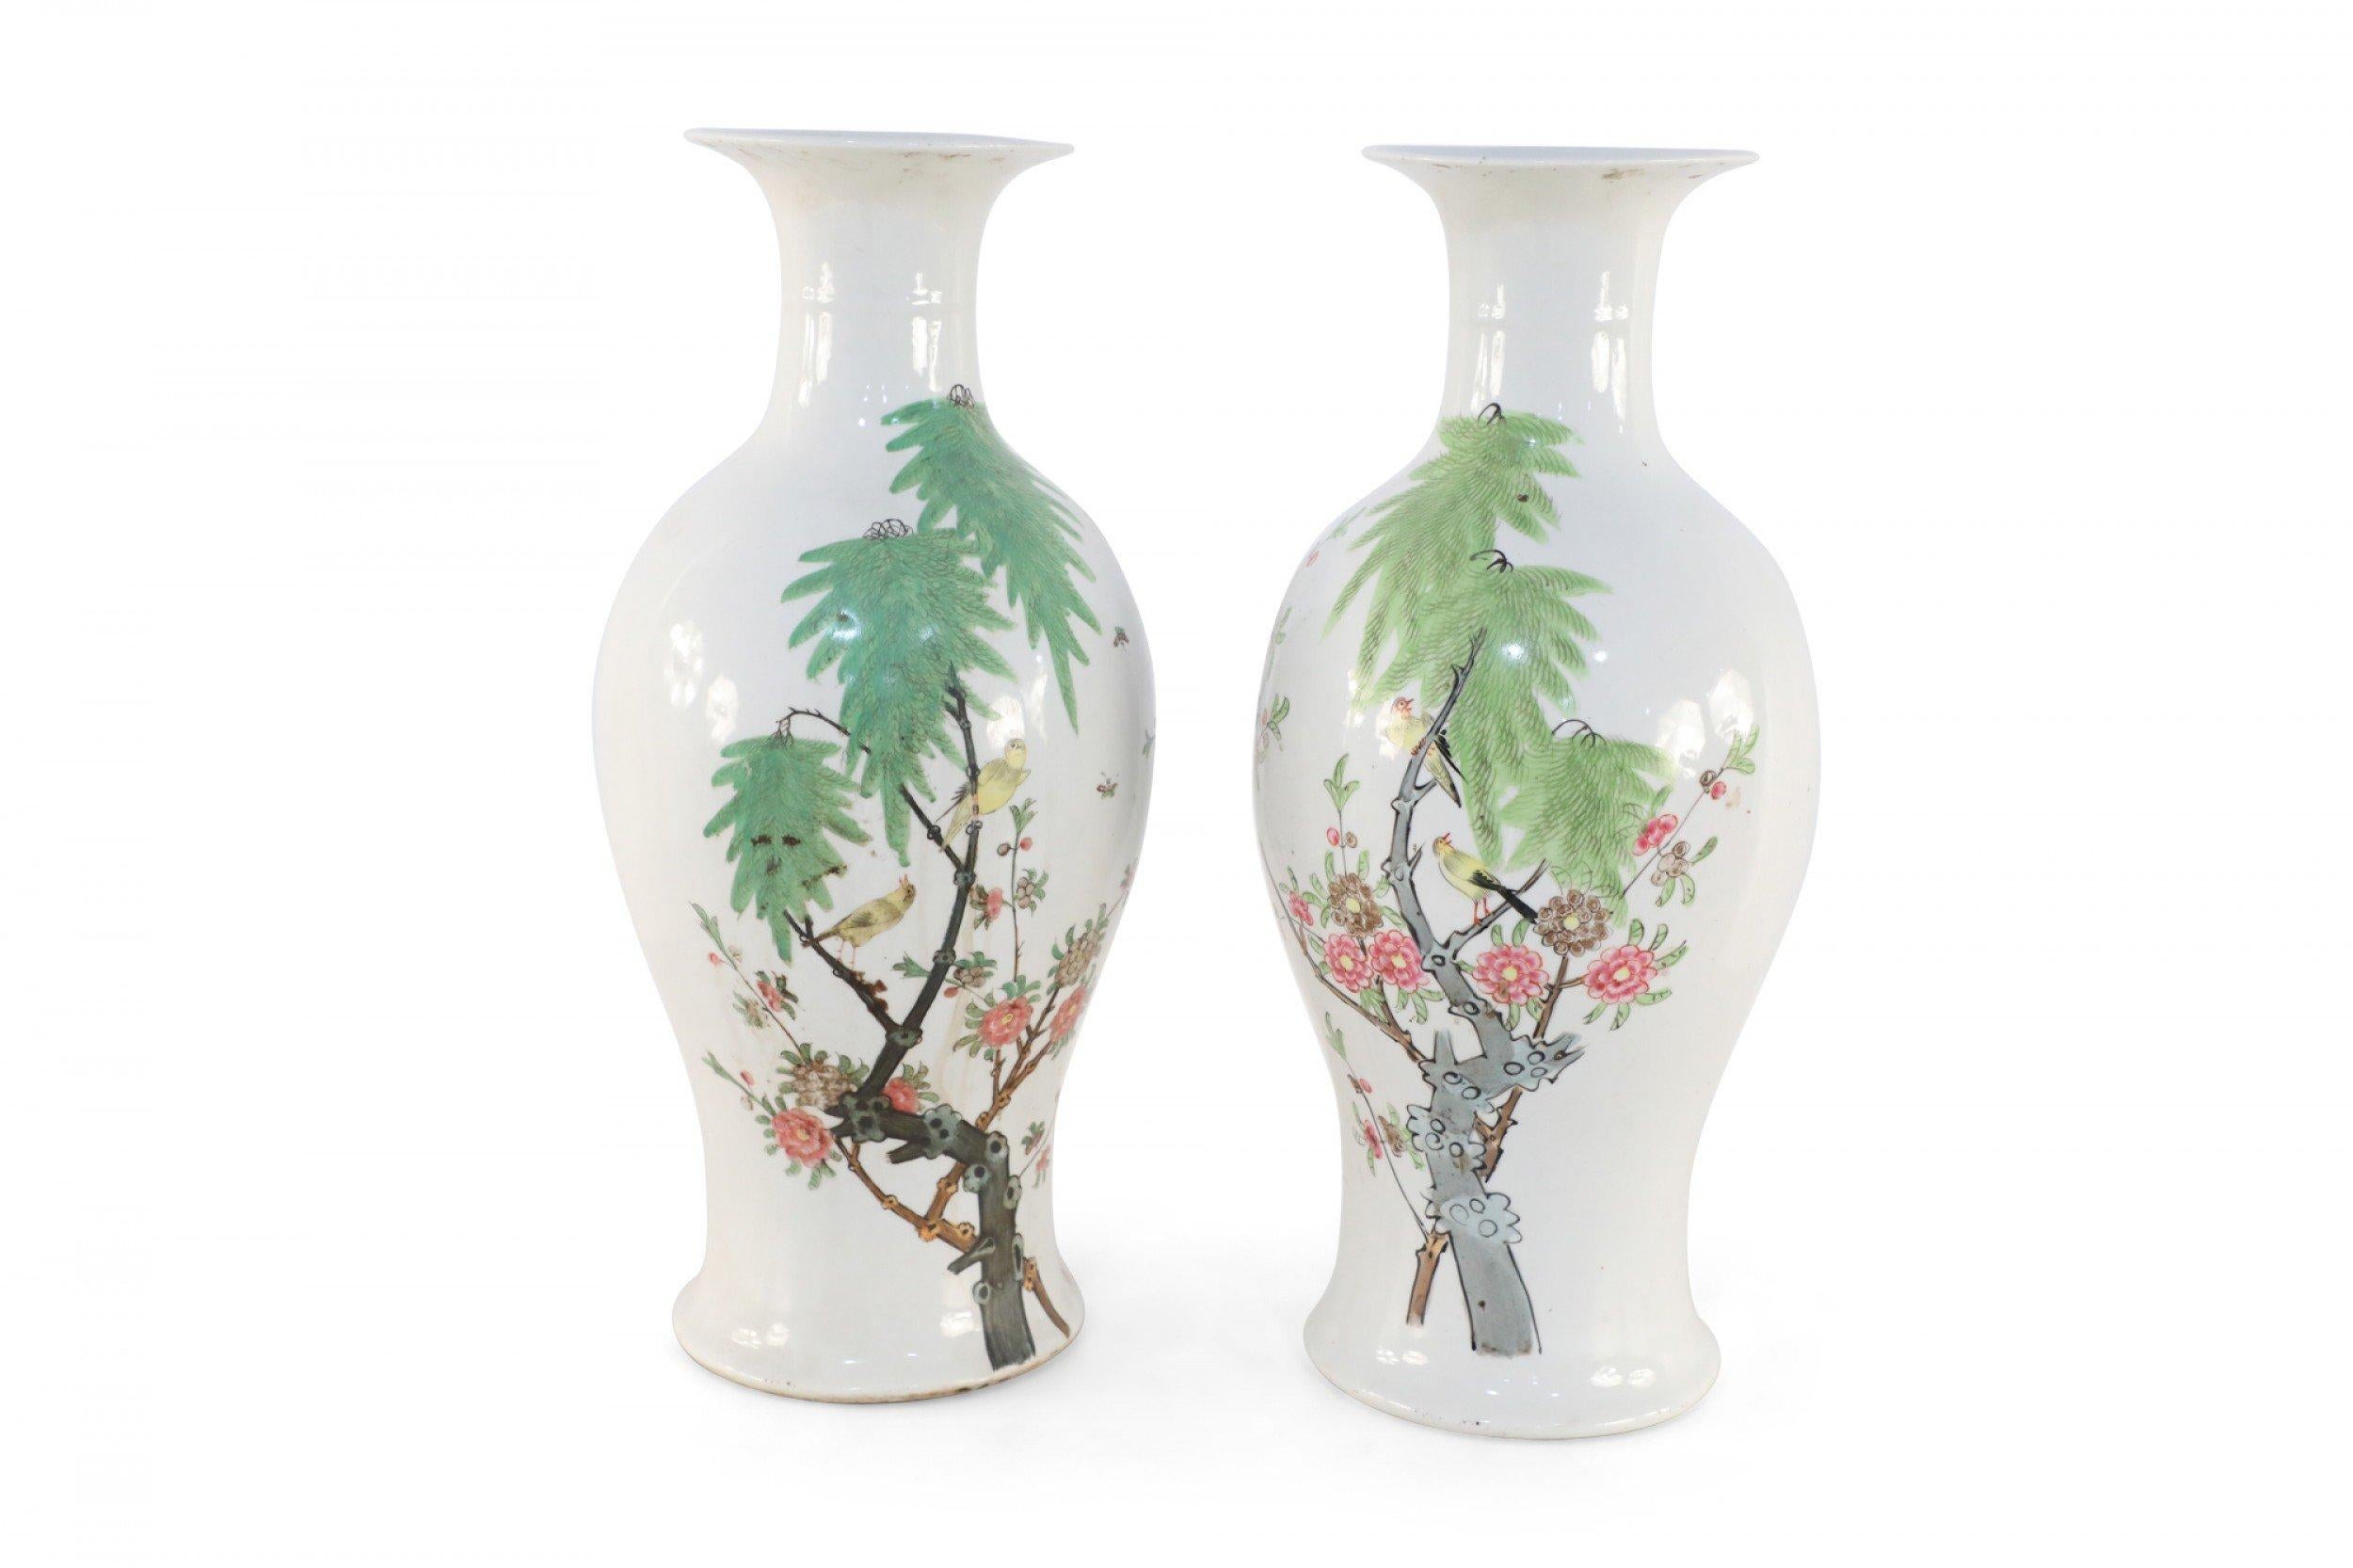 Pair of Chinese White and Cherry Blossom Branch Porcelain Urns For Sale 2